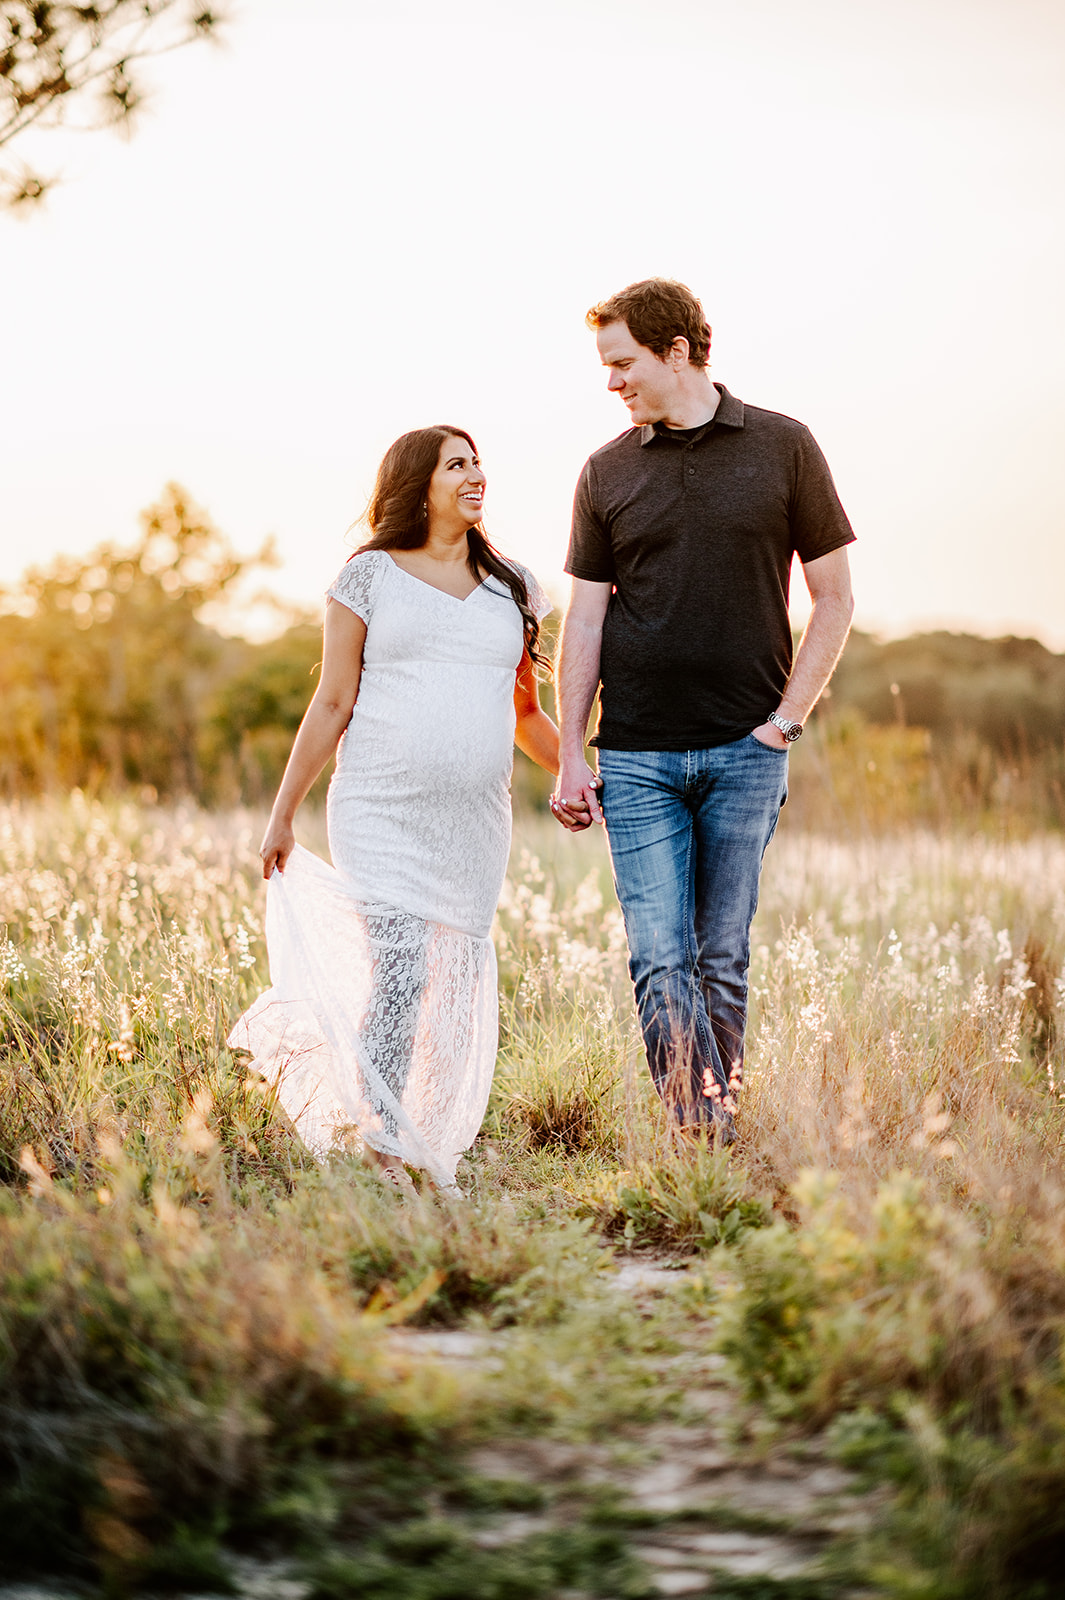 A mom to be in a white lace maternity gown and her husband in a brown polo walk through a field of tall grass while holding hands City of Oaks Midwifery